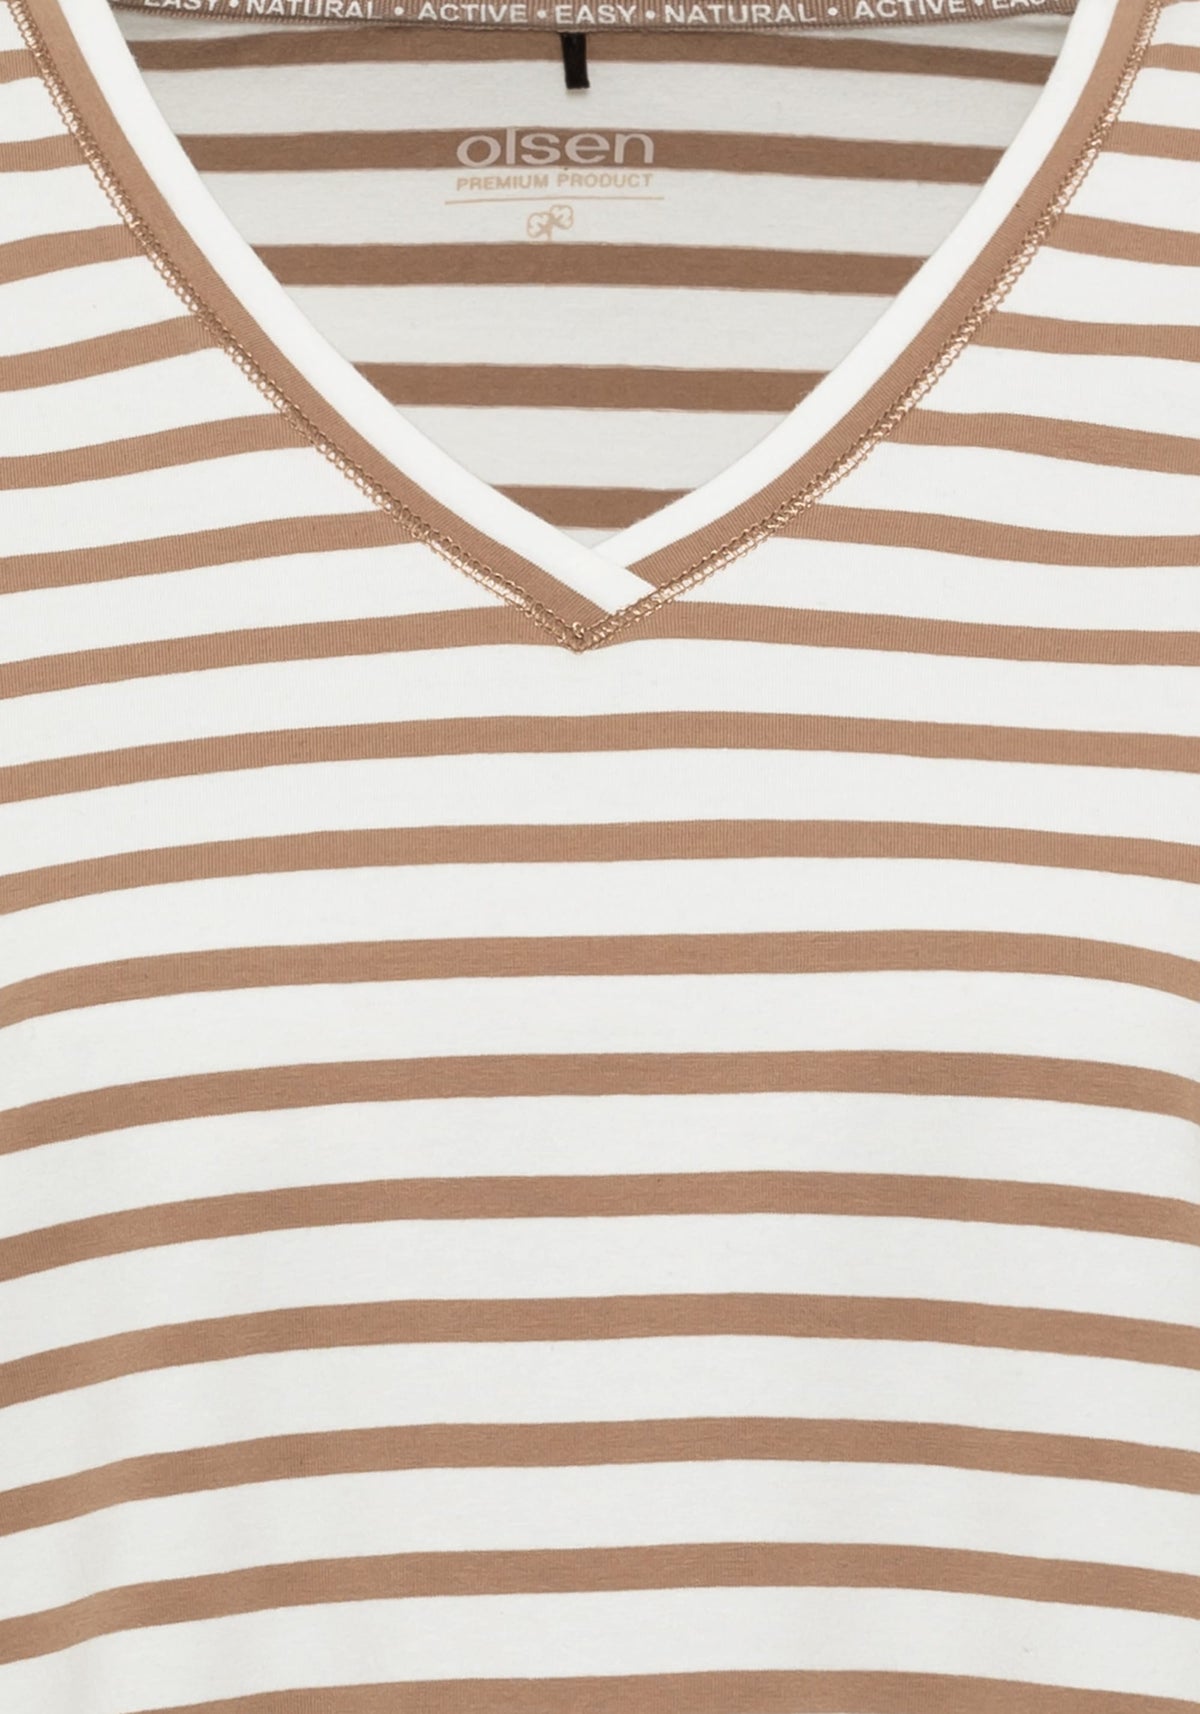 Cotton Blend 3/4 Sleeve Striped Tee